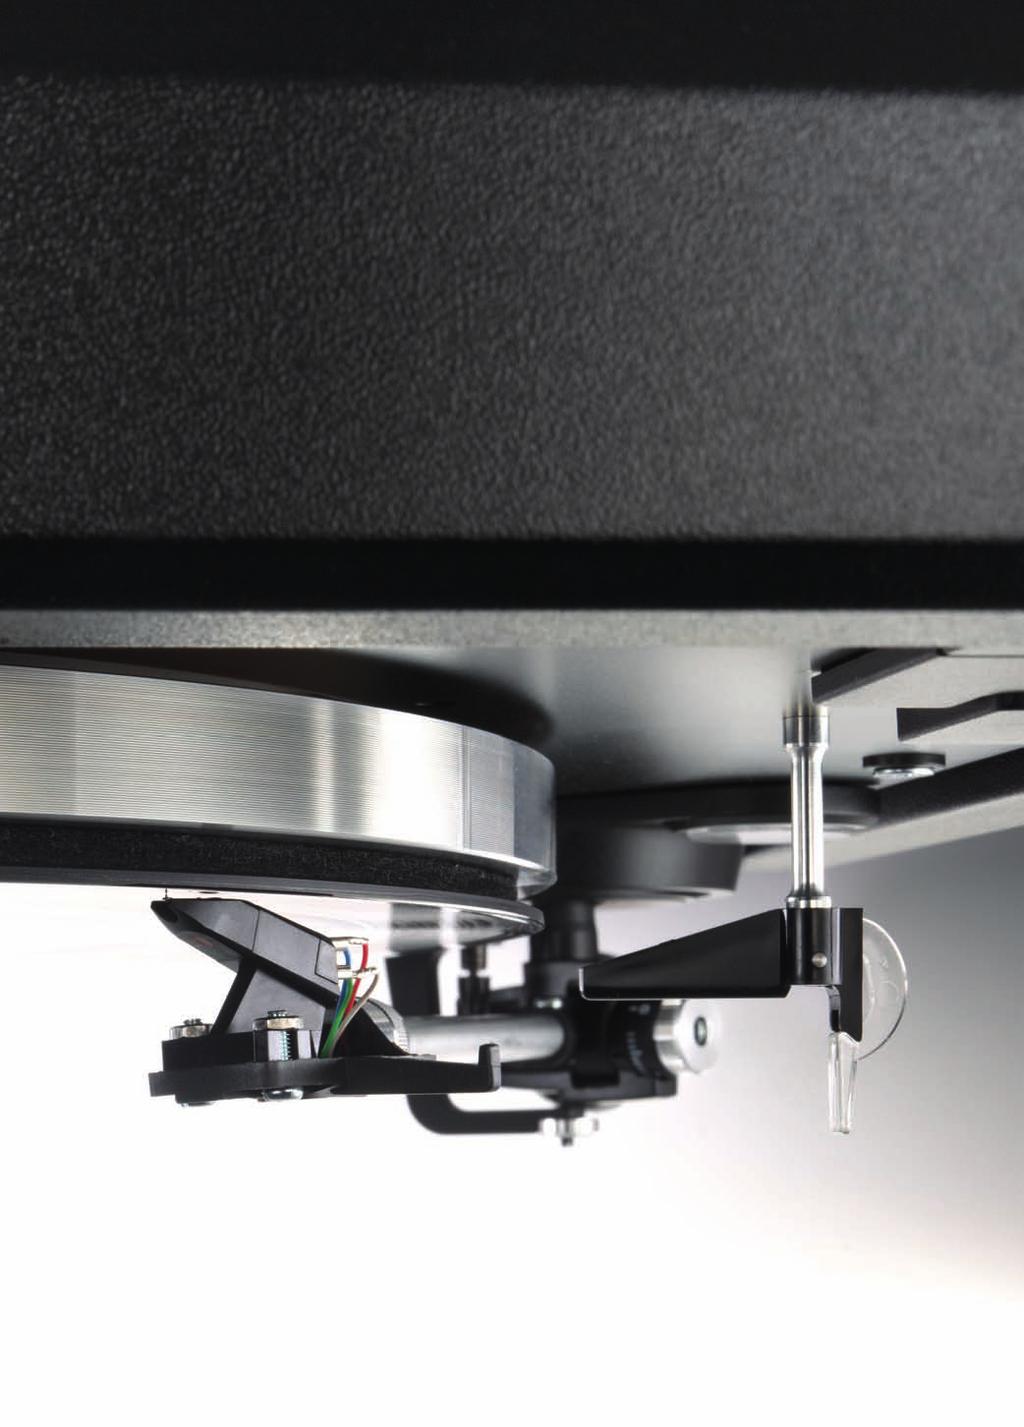 made in Germany Subject to correction and alterations. analogue turntables www.